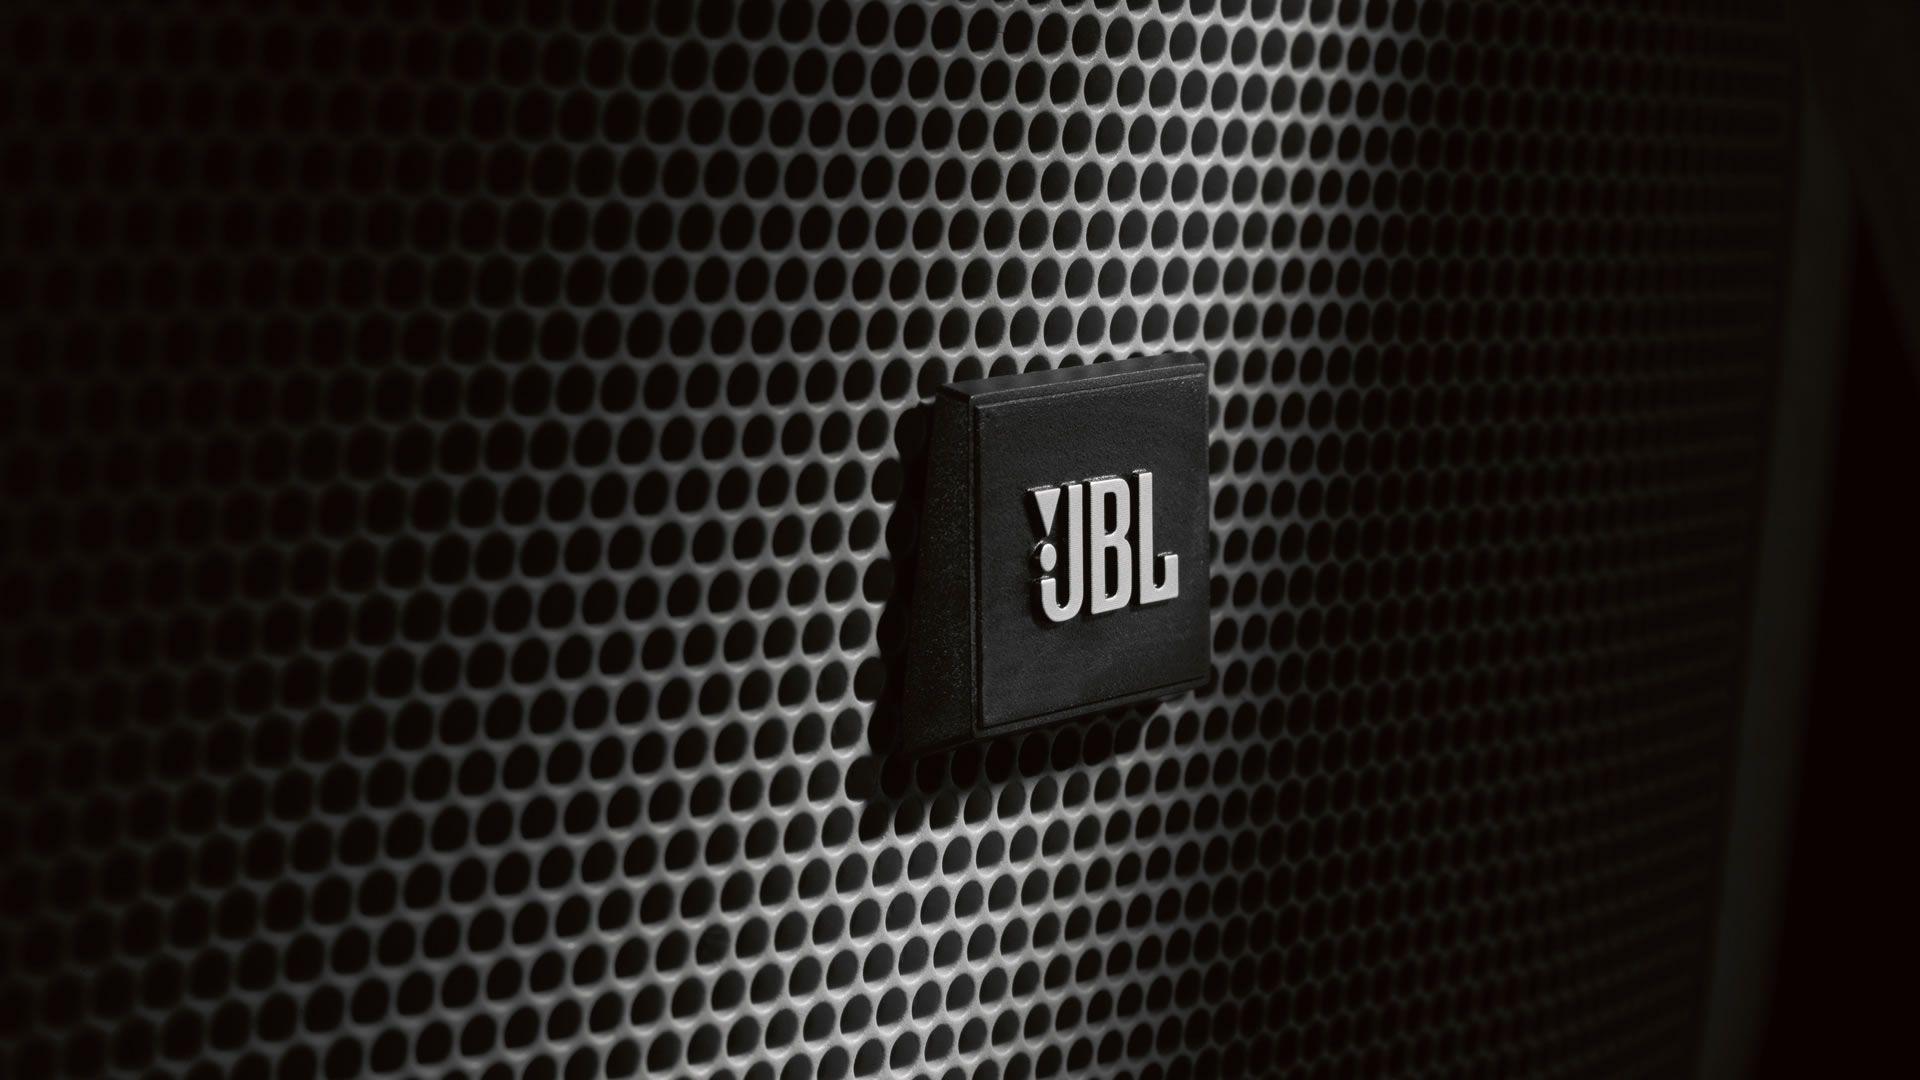 JBL HD Wallpapers and Backgrounds